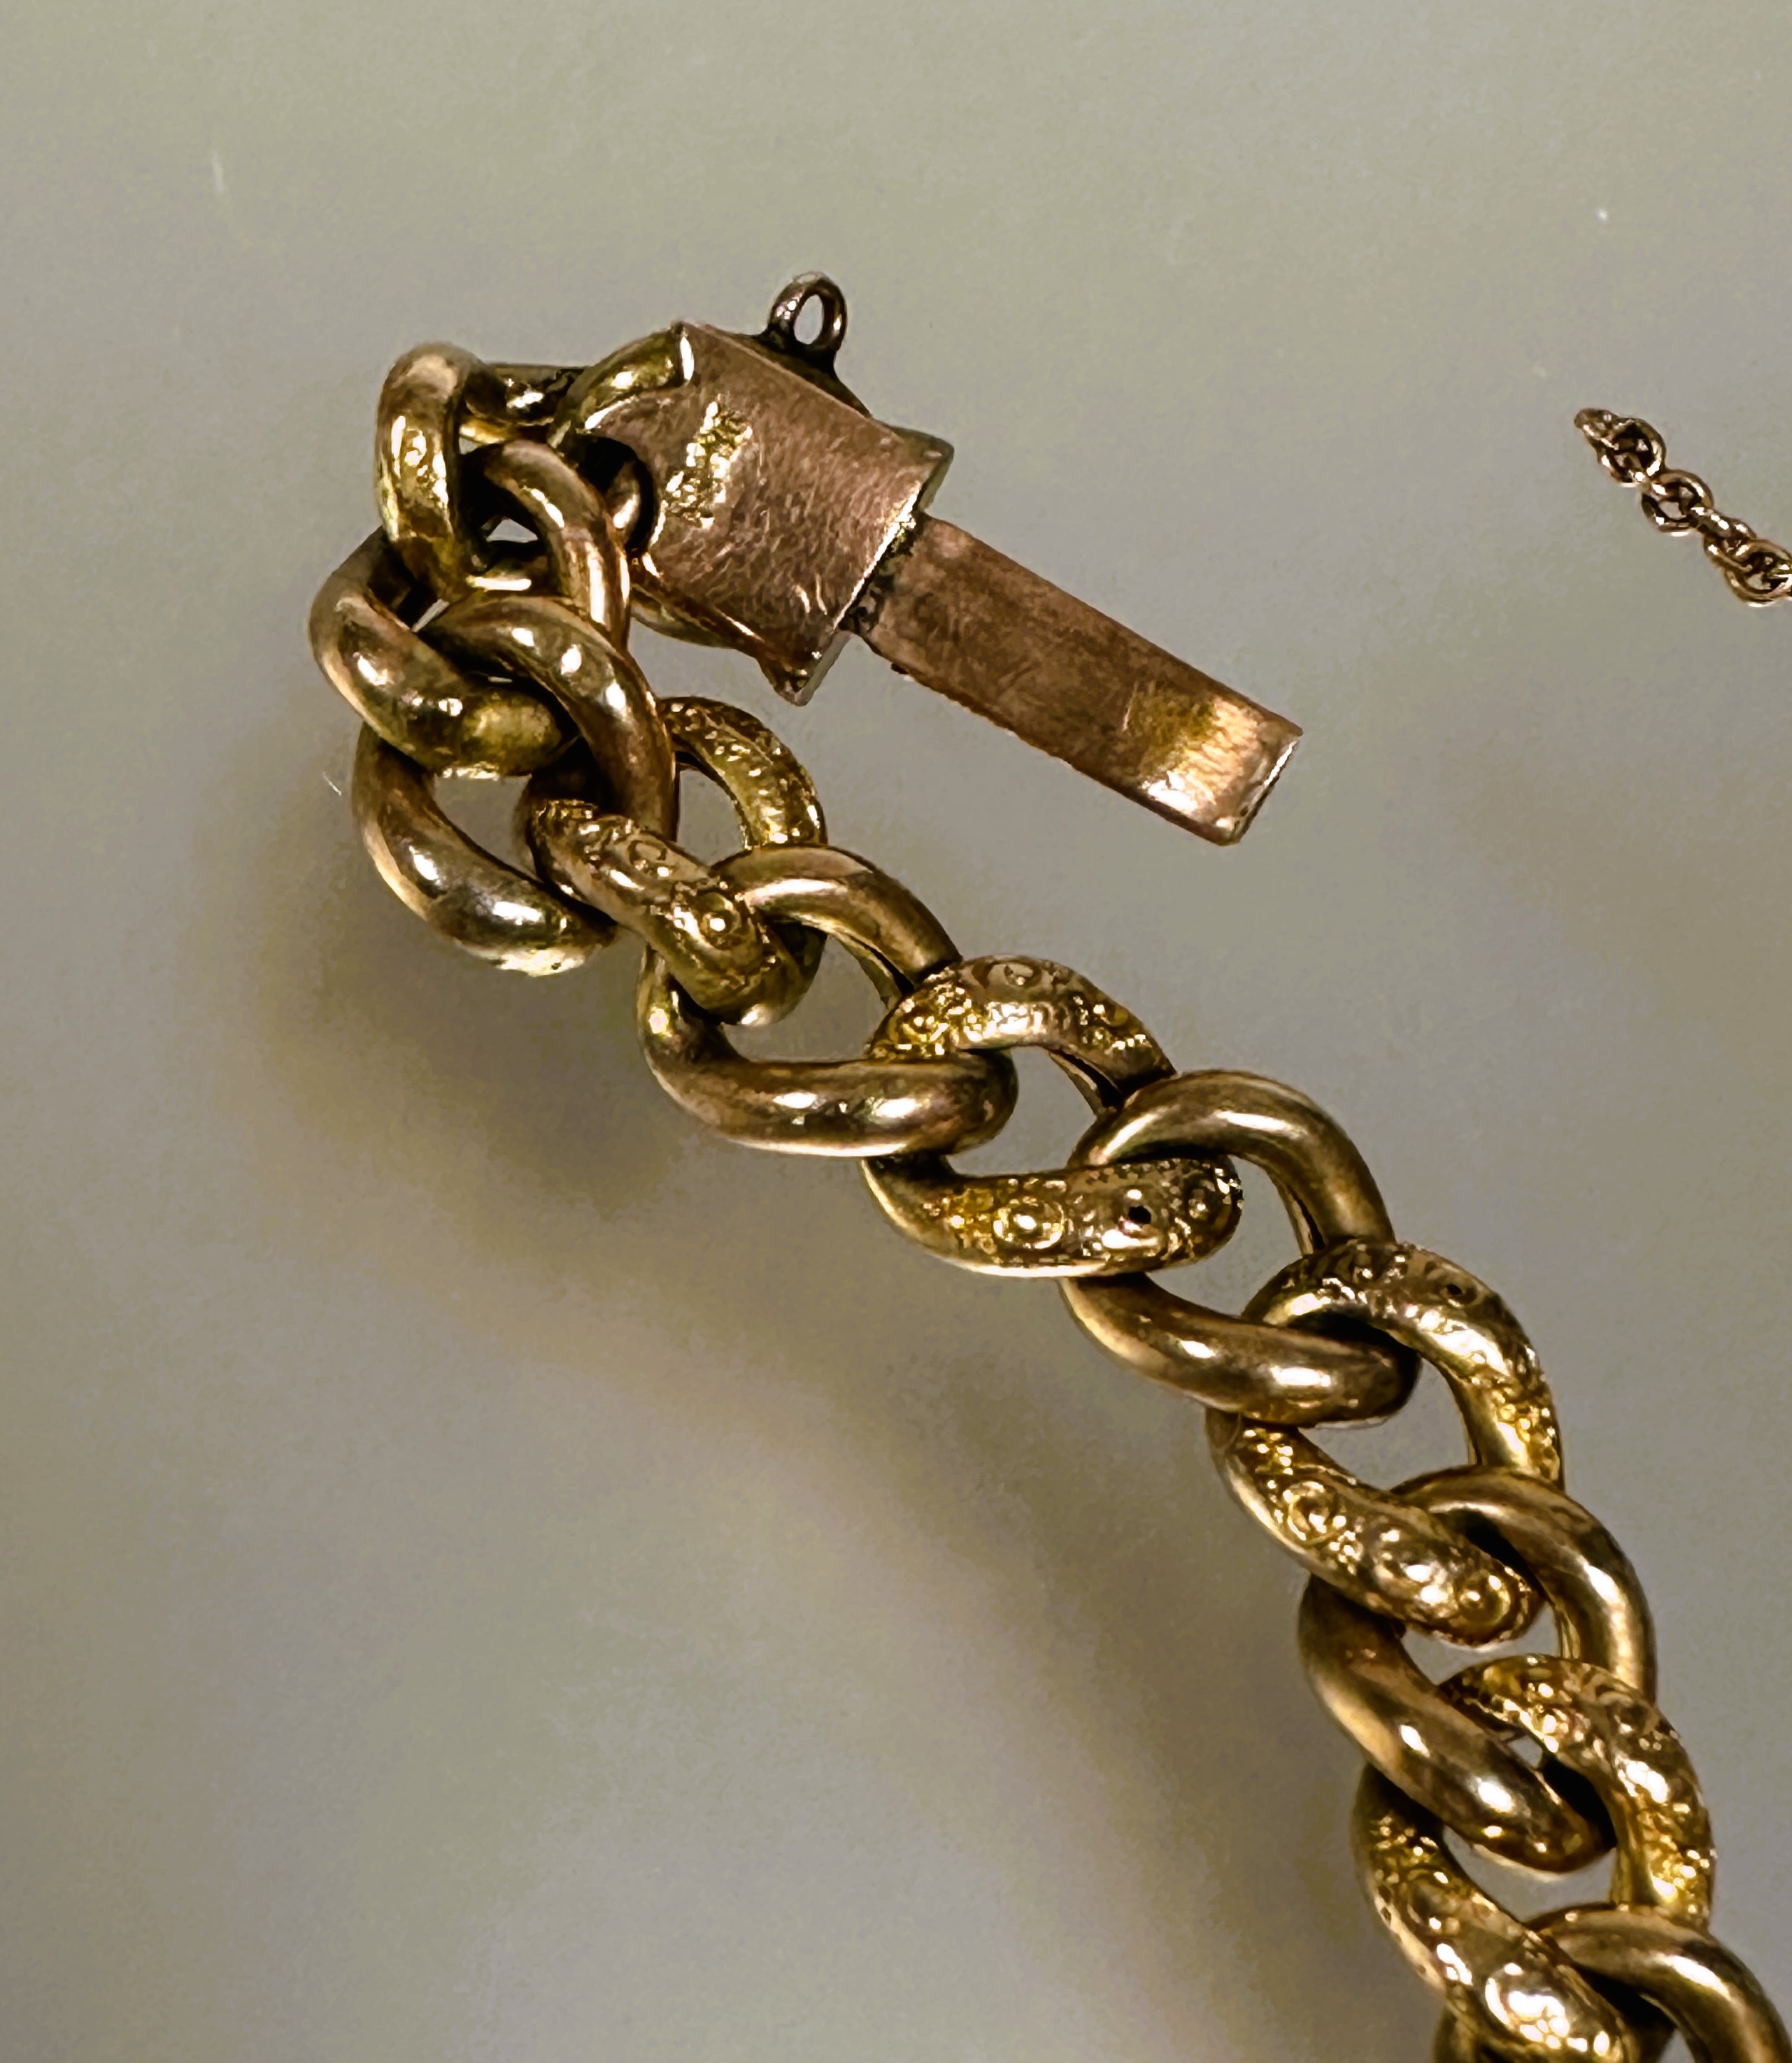 A late 19thc 9ct gold engraved kerb link chain bracelet with clasp fastening and safety chain - Image 5 of 5